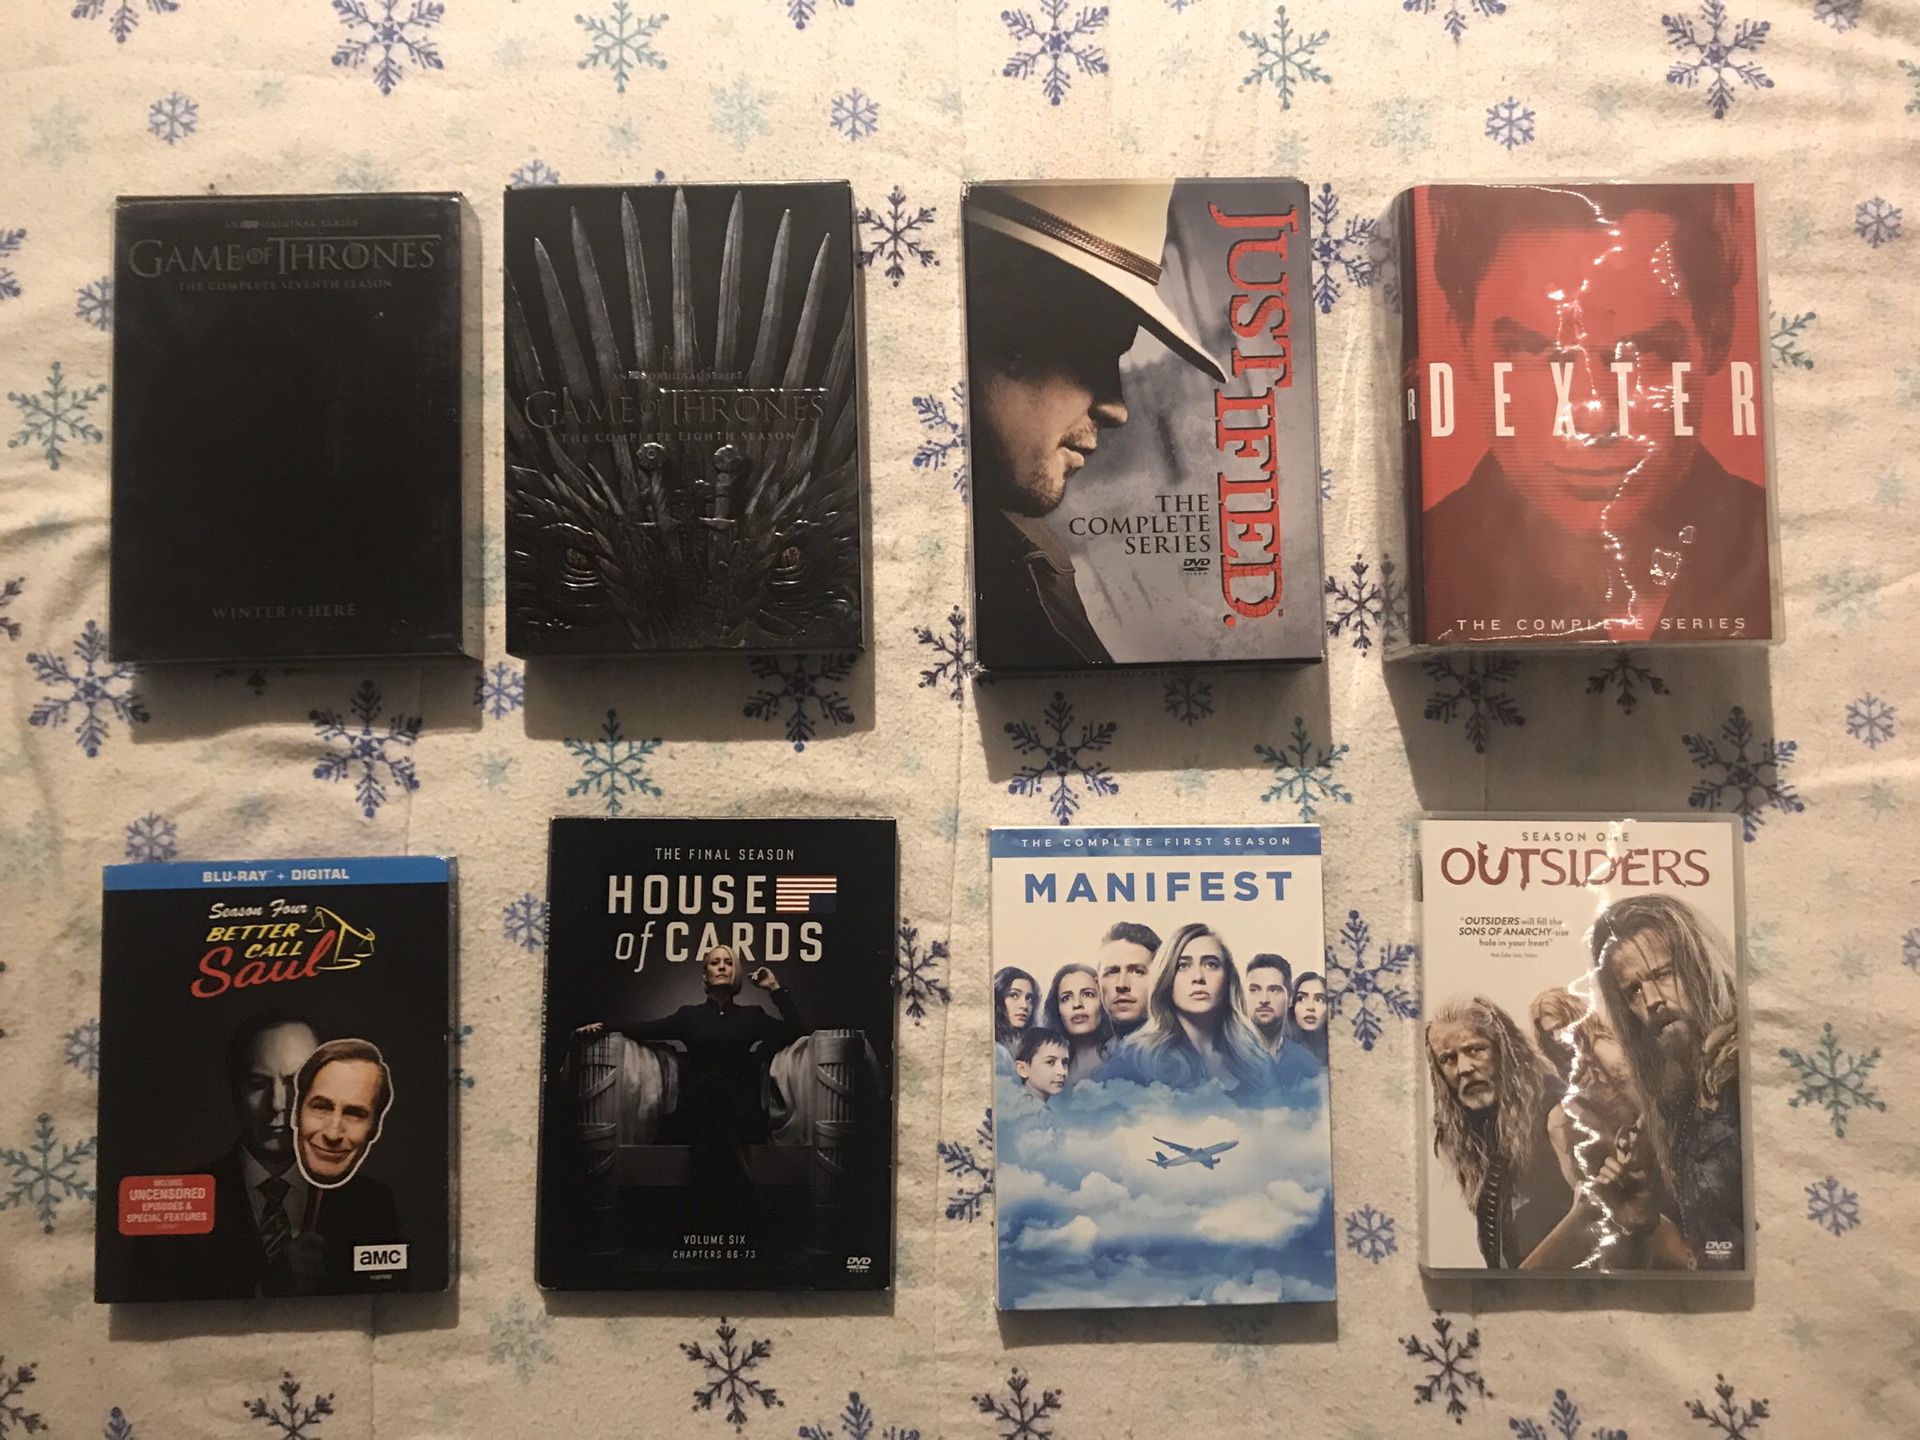 TV series / movies “Game of Thrones” & “Better Call Saul”